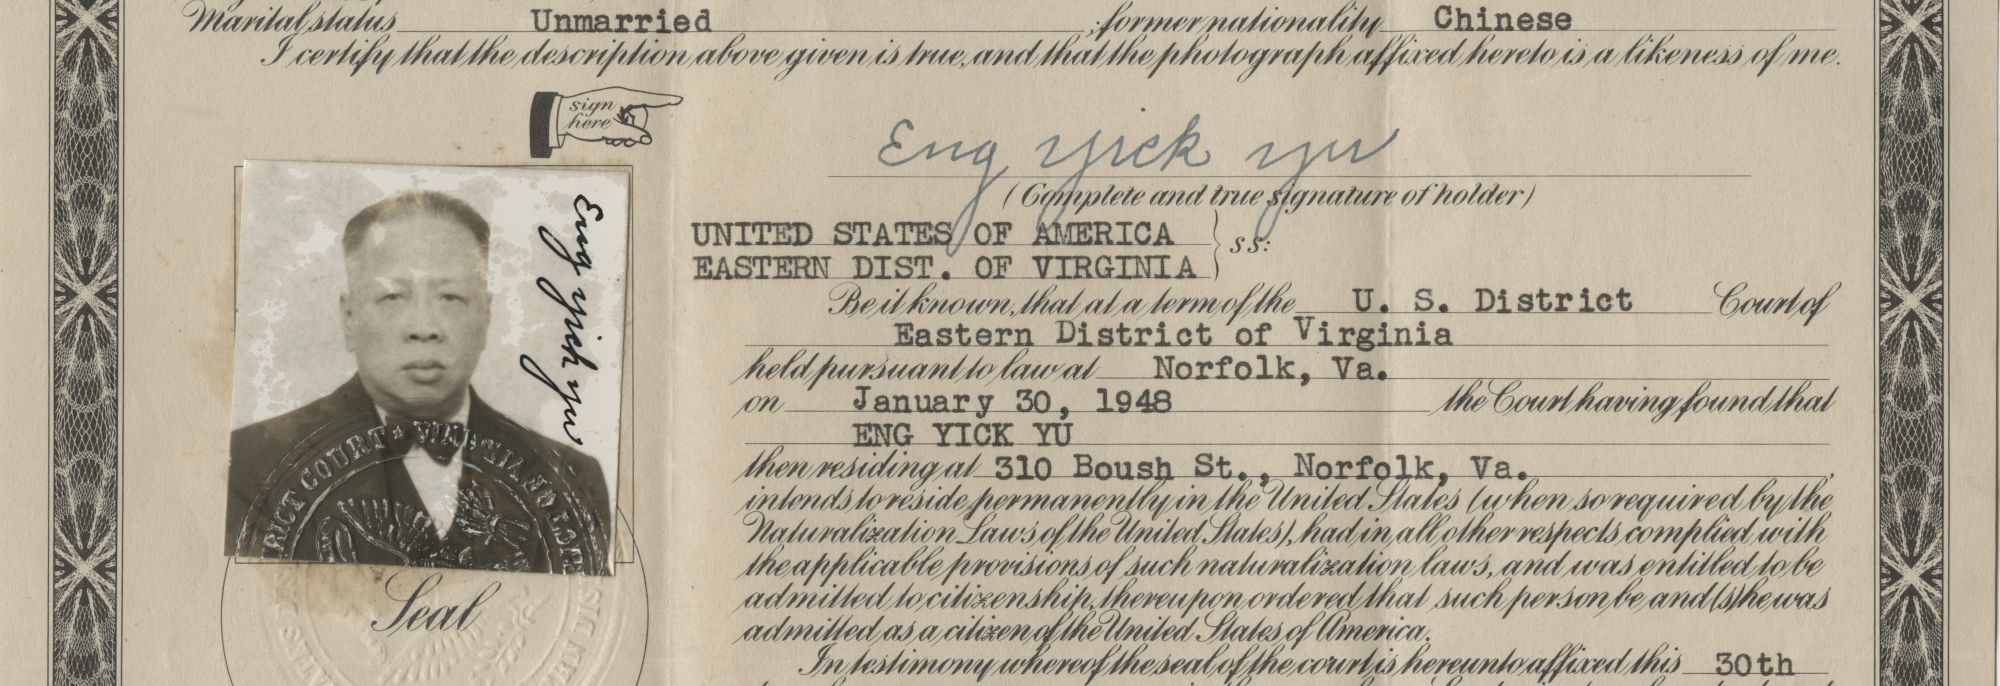 Abandoned Papers: The Naturalization Certificates of Ow Chuck Sam and Eng Yick Yu